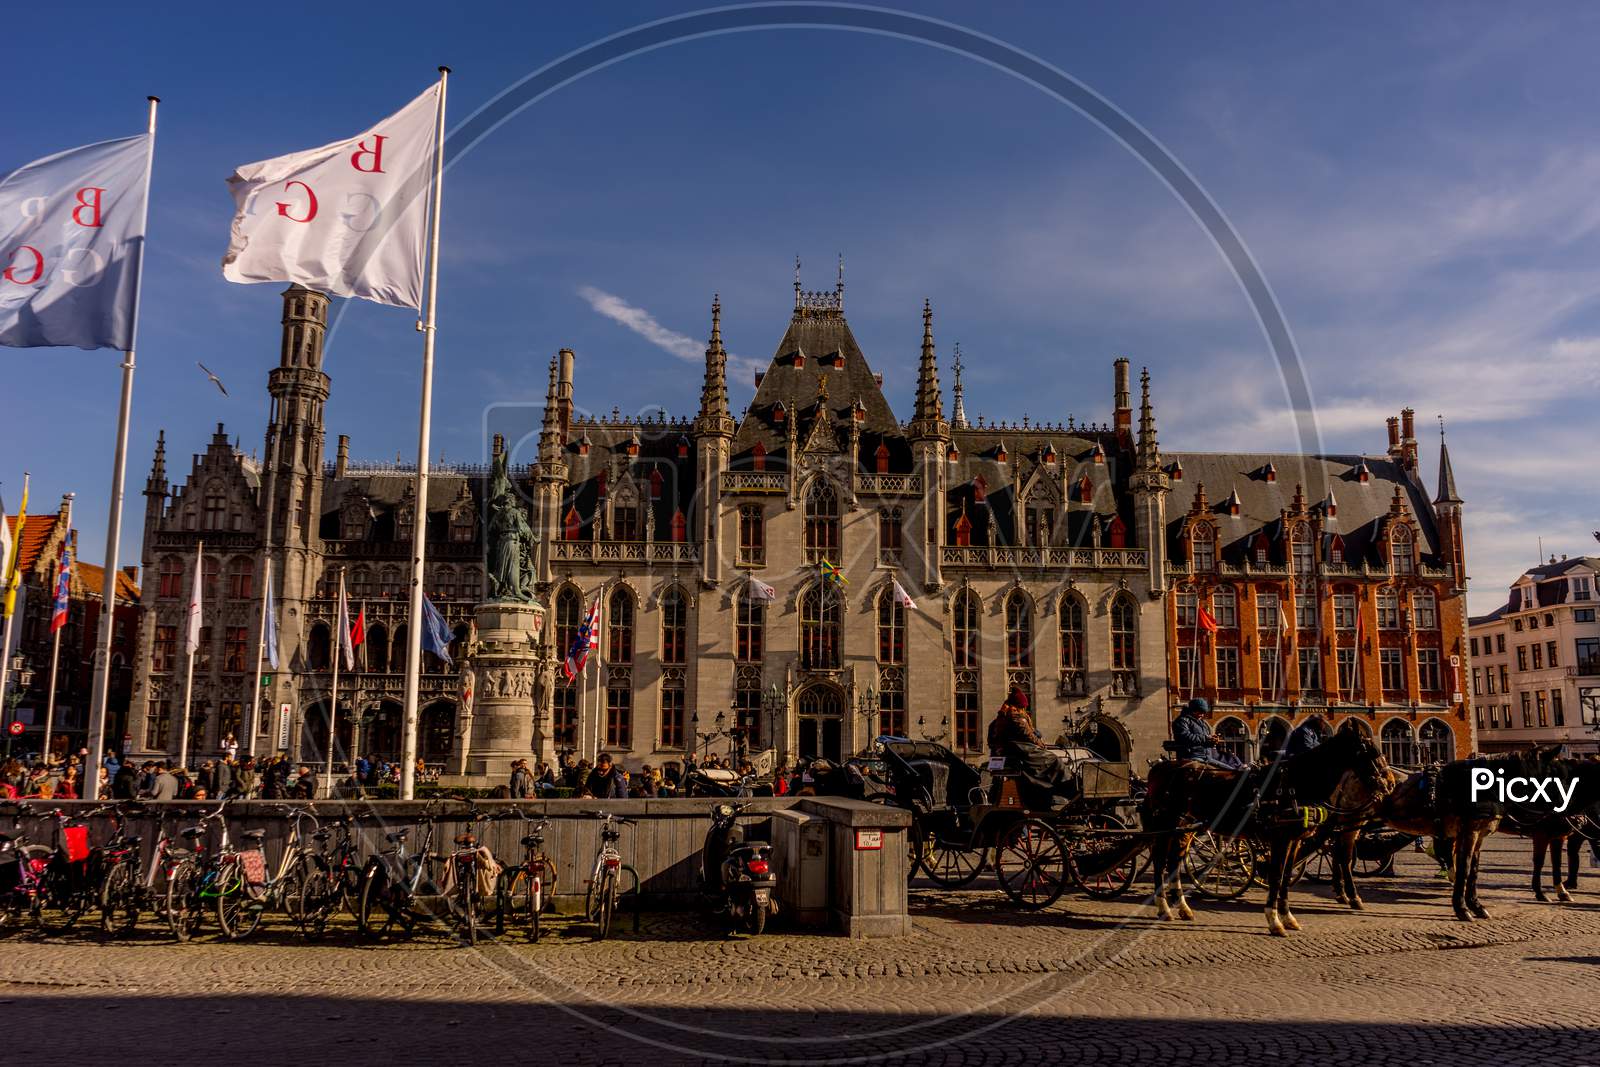 Bruges, Belgium - 17 February 2018: A Horse Cart Is Parked In Front Of The Provincial Court In Bruges, Belgium